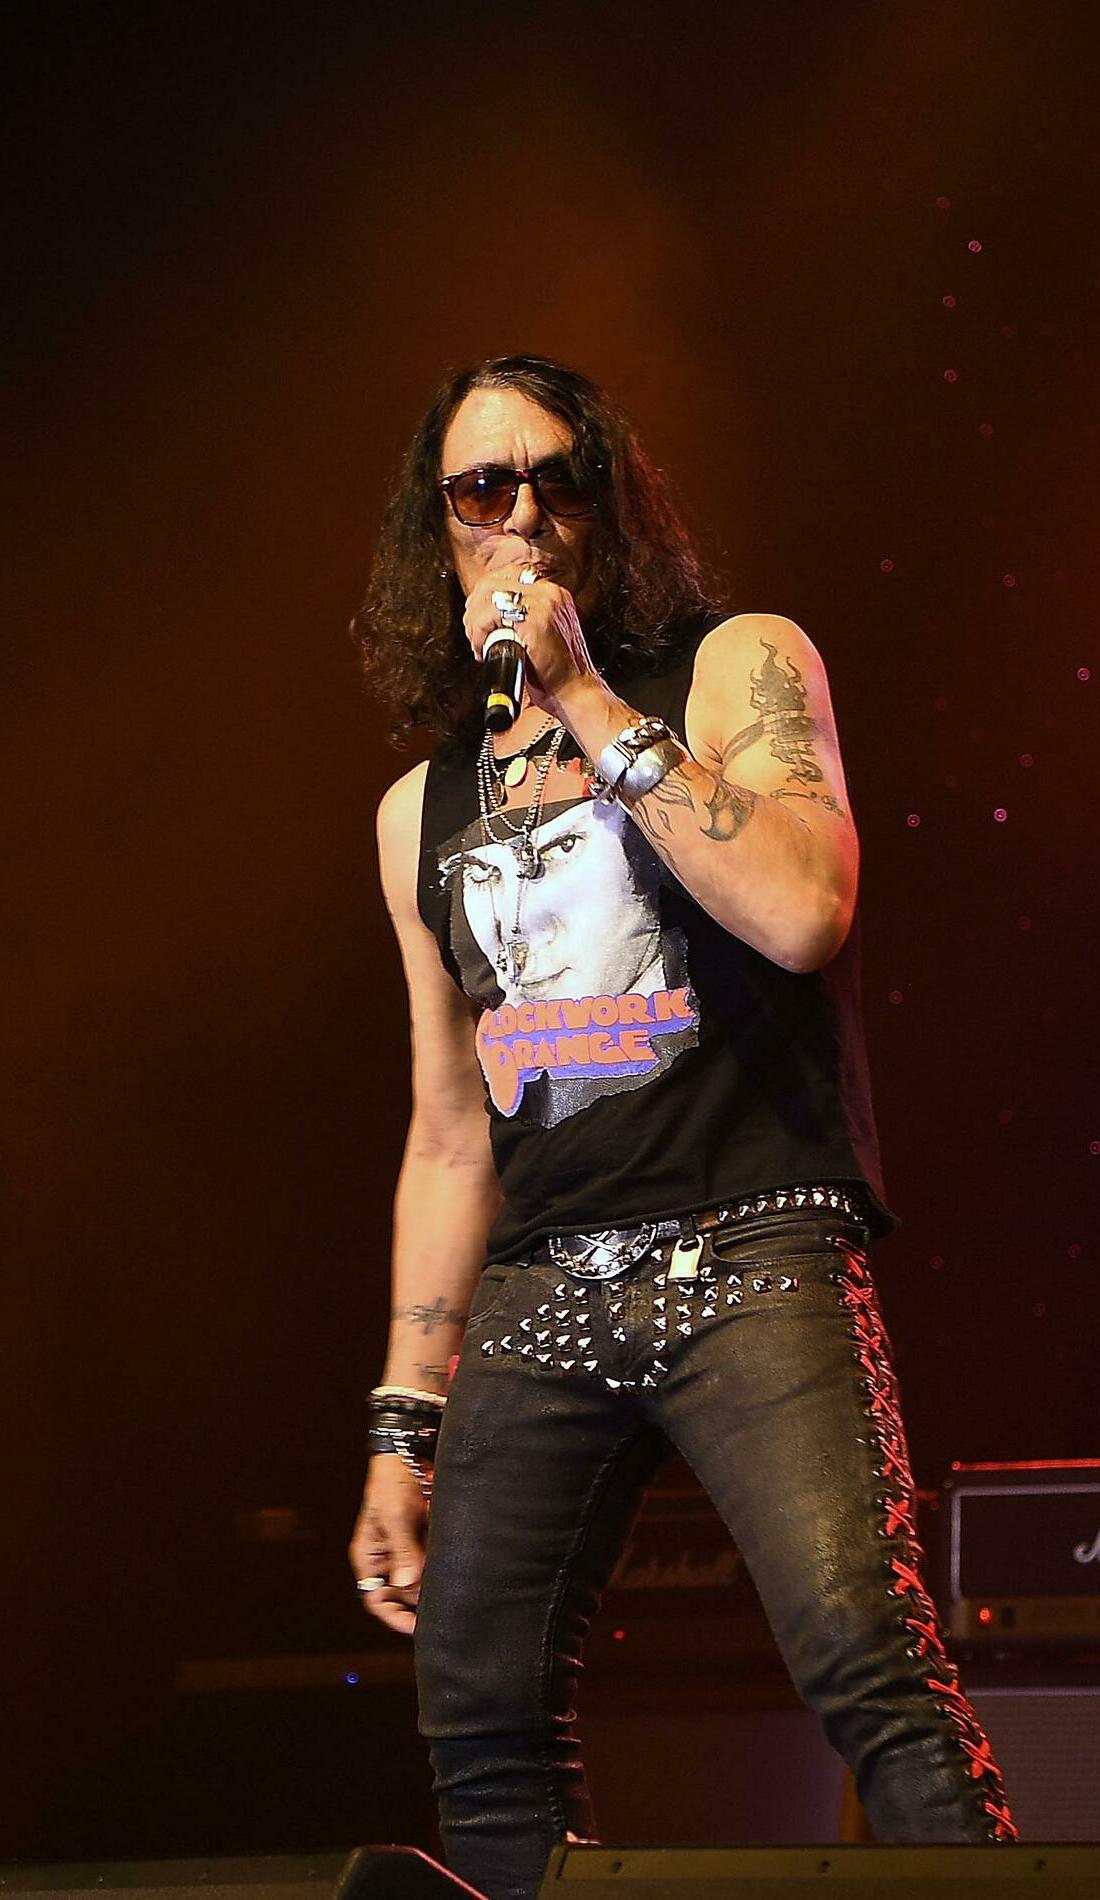 stephen pearcy on tour